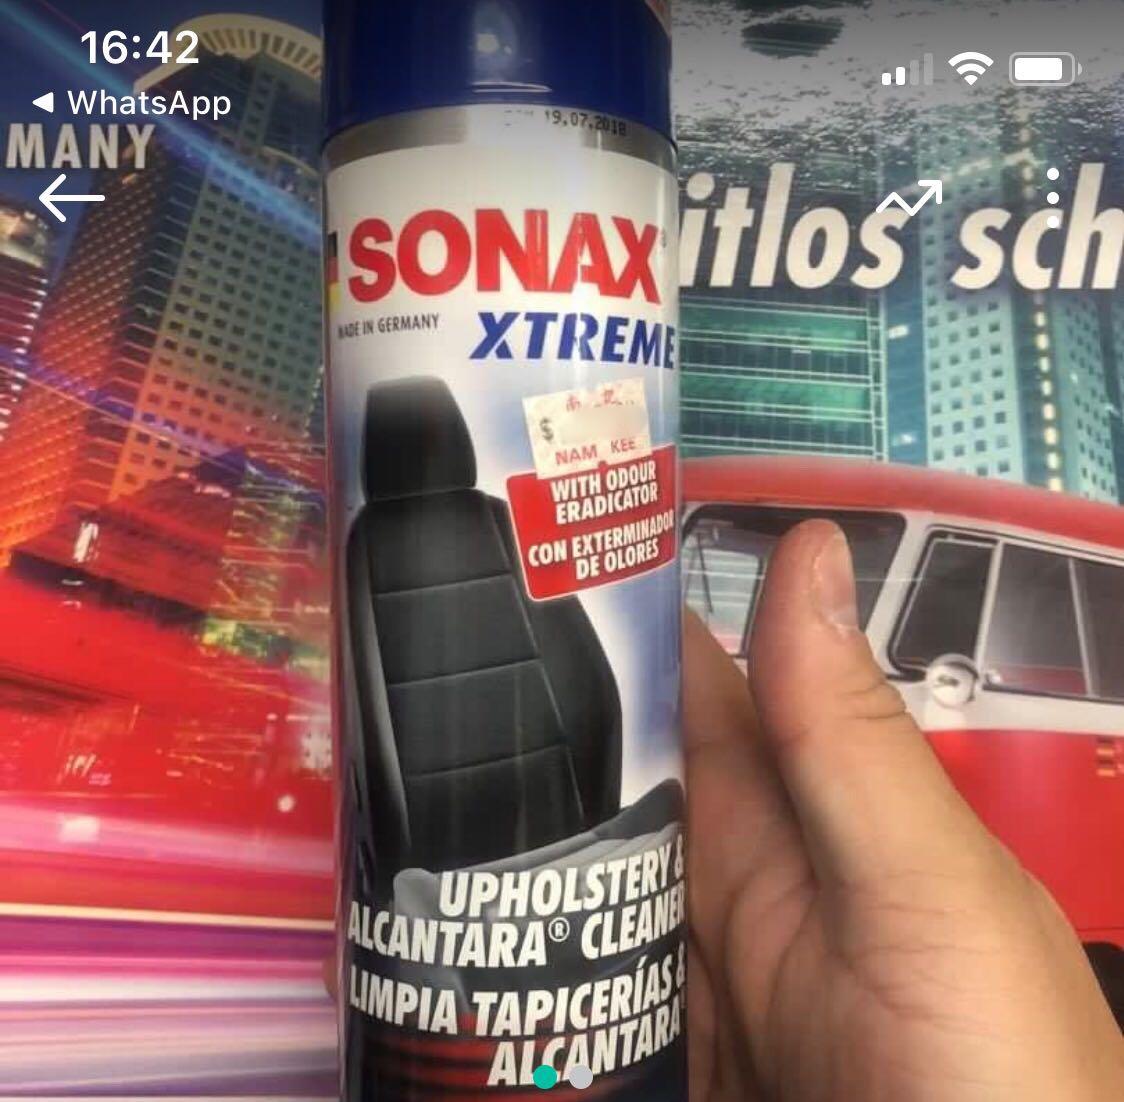 Sonax Xtreme Upholstery & Alcantara Cleaner, Car Accessories